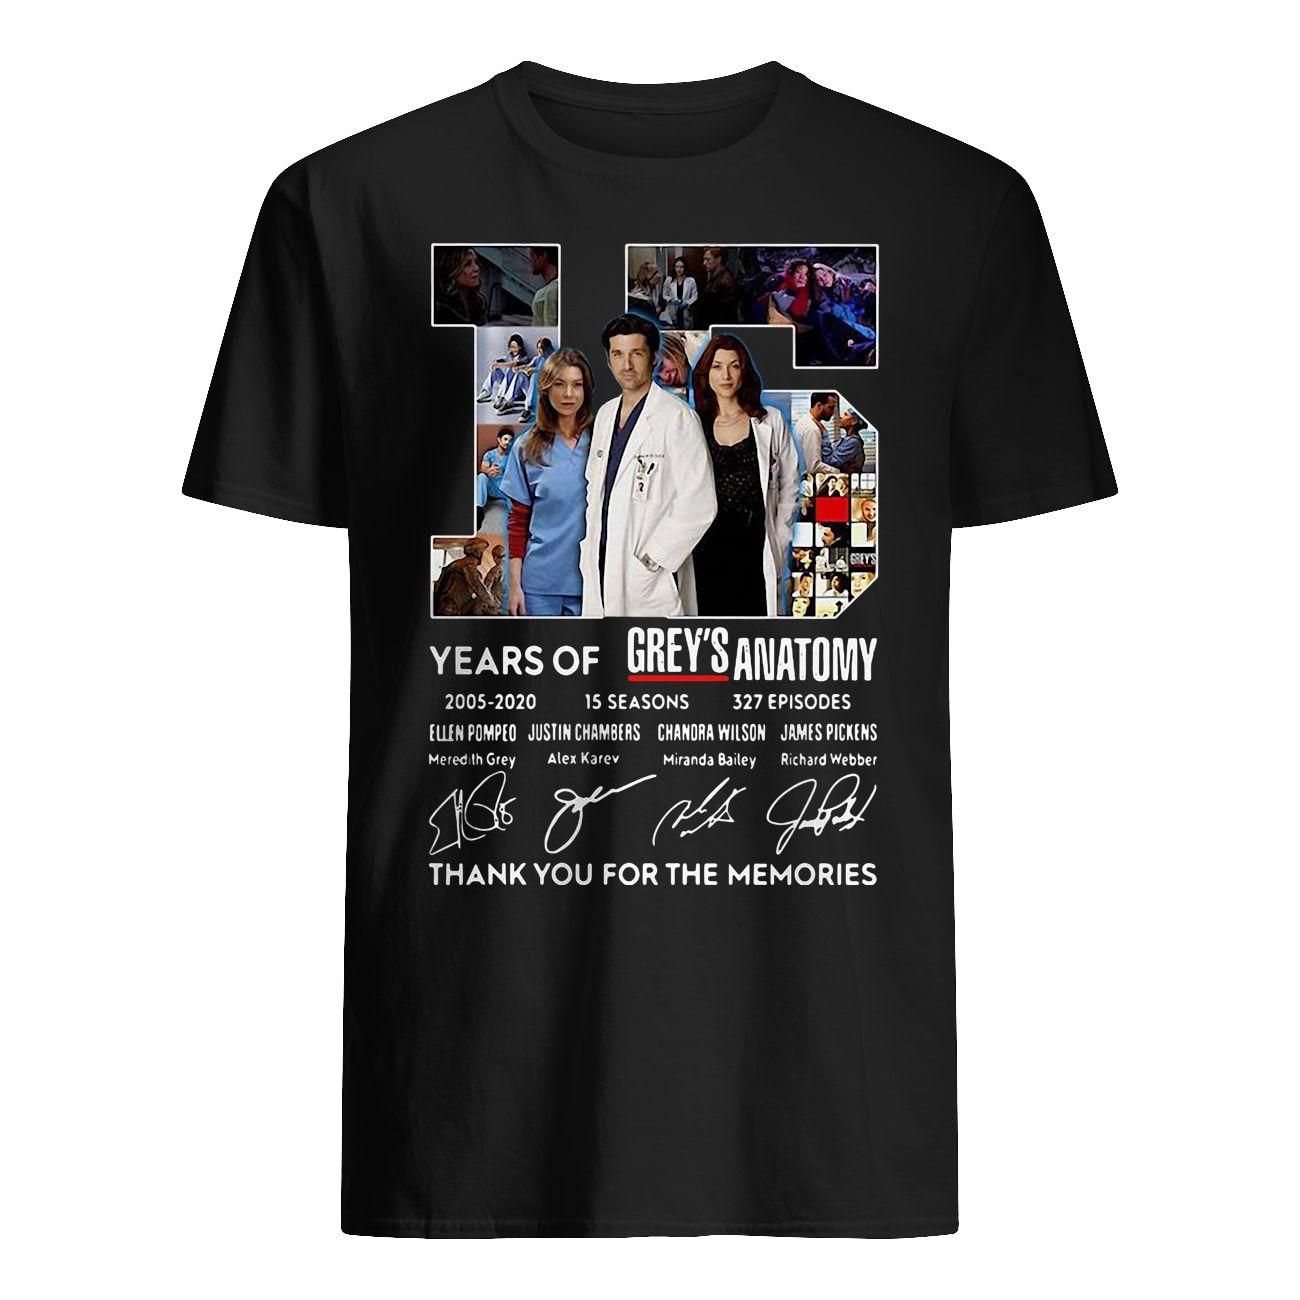 15 Years Of Greyâ€™s atomy 2005-2020 Thank You For The Memories Signature T-shirt